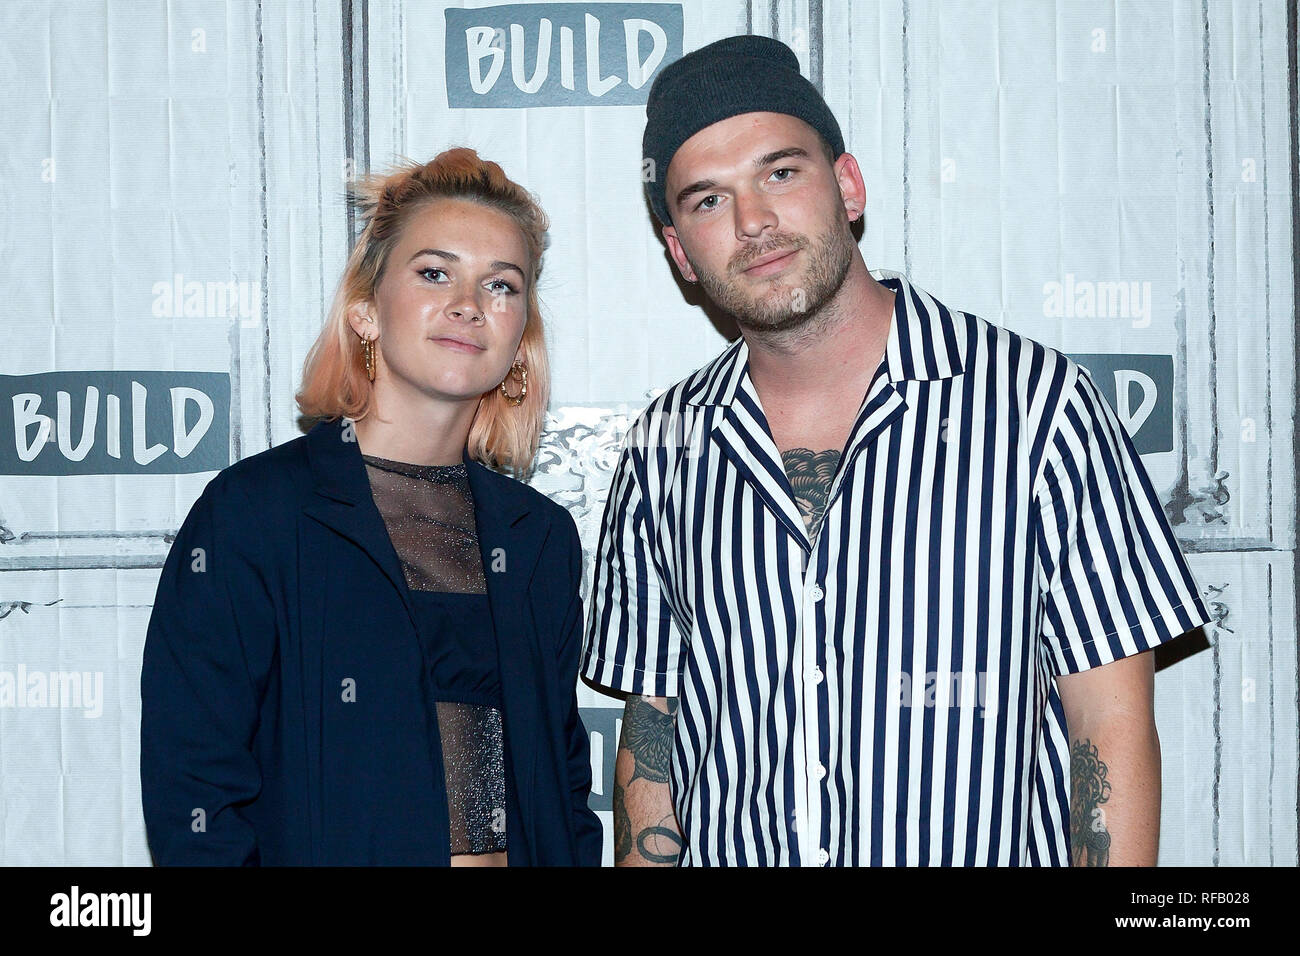 New York, USA. 24 Jan, 2019. Georgia Nott, Caleb Nott at The Thursday, Jan 24, 2019 BUILD Series Inside Candids discussing the new album 'Concious' at BUILD Studio in New York, USA. Credit: Steve Mack/S.D. Mack Pictures/Alamy Live News Stock Photo